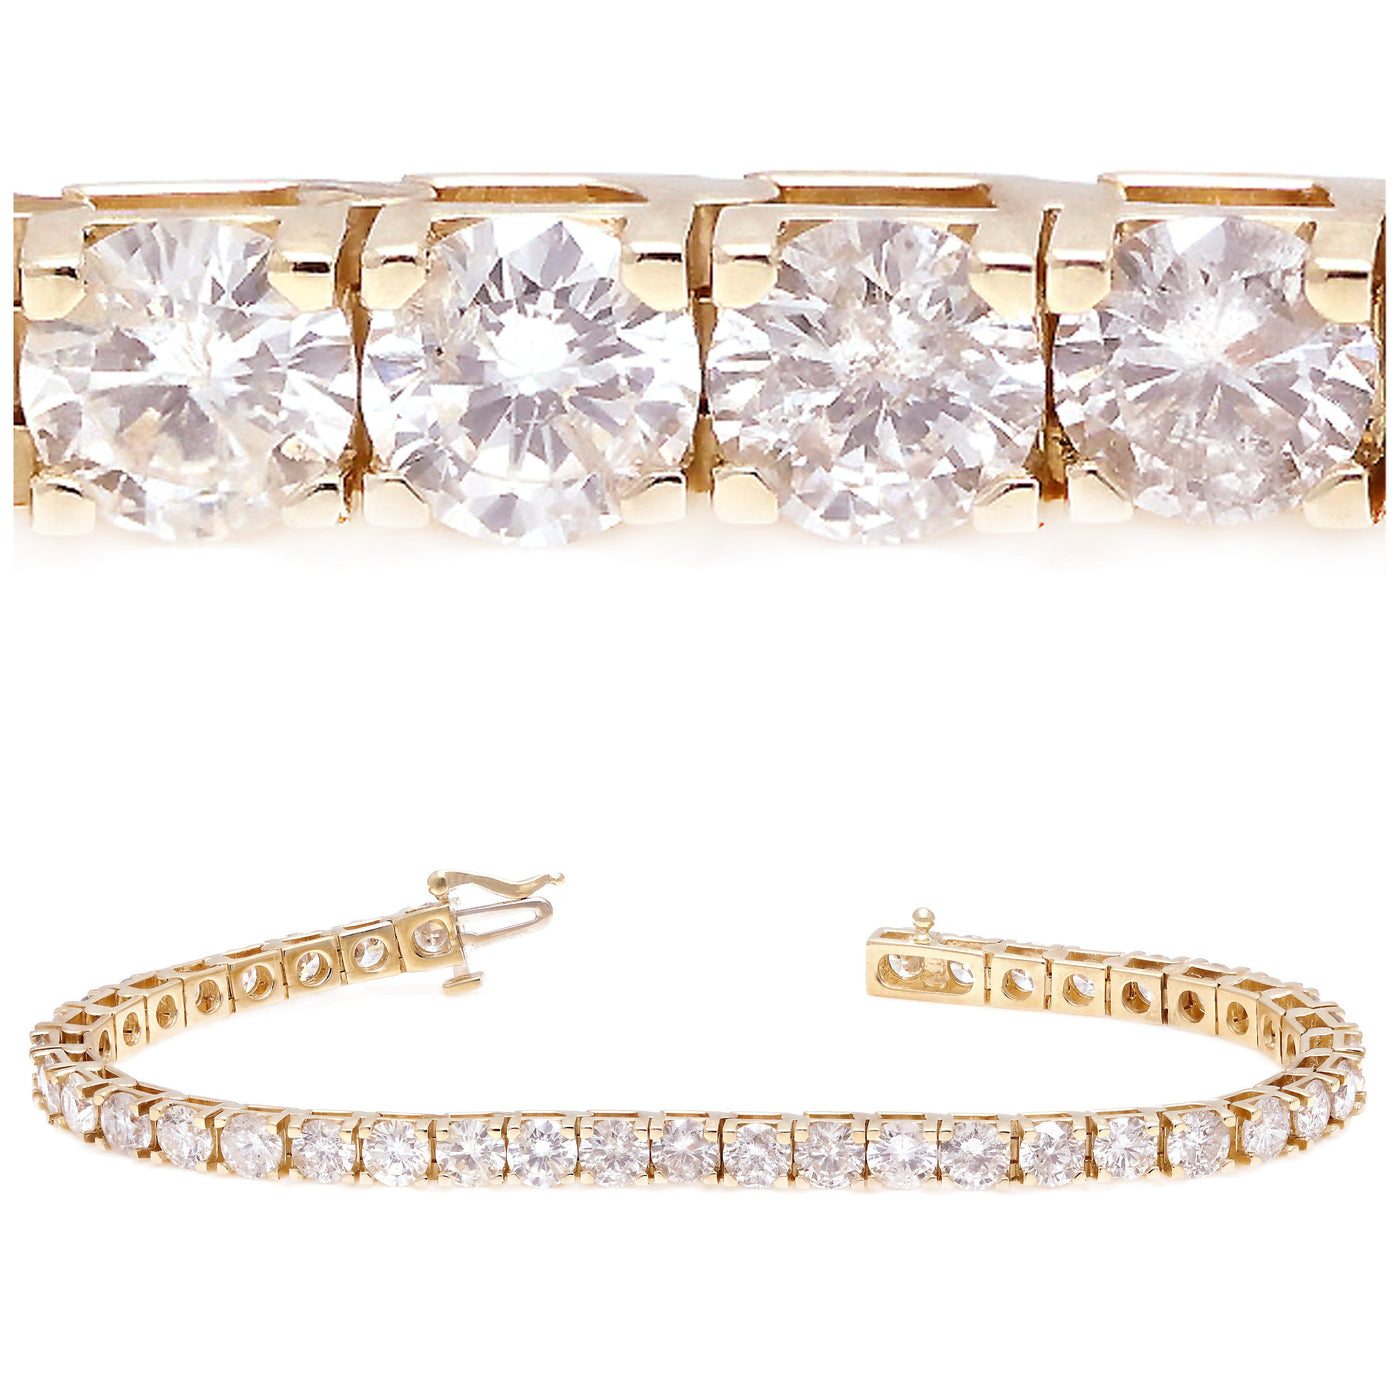 One of Direct Source Gold & Diamond's gold diamond bracelets, with a close-up of gorgeous round diamonds.